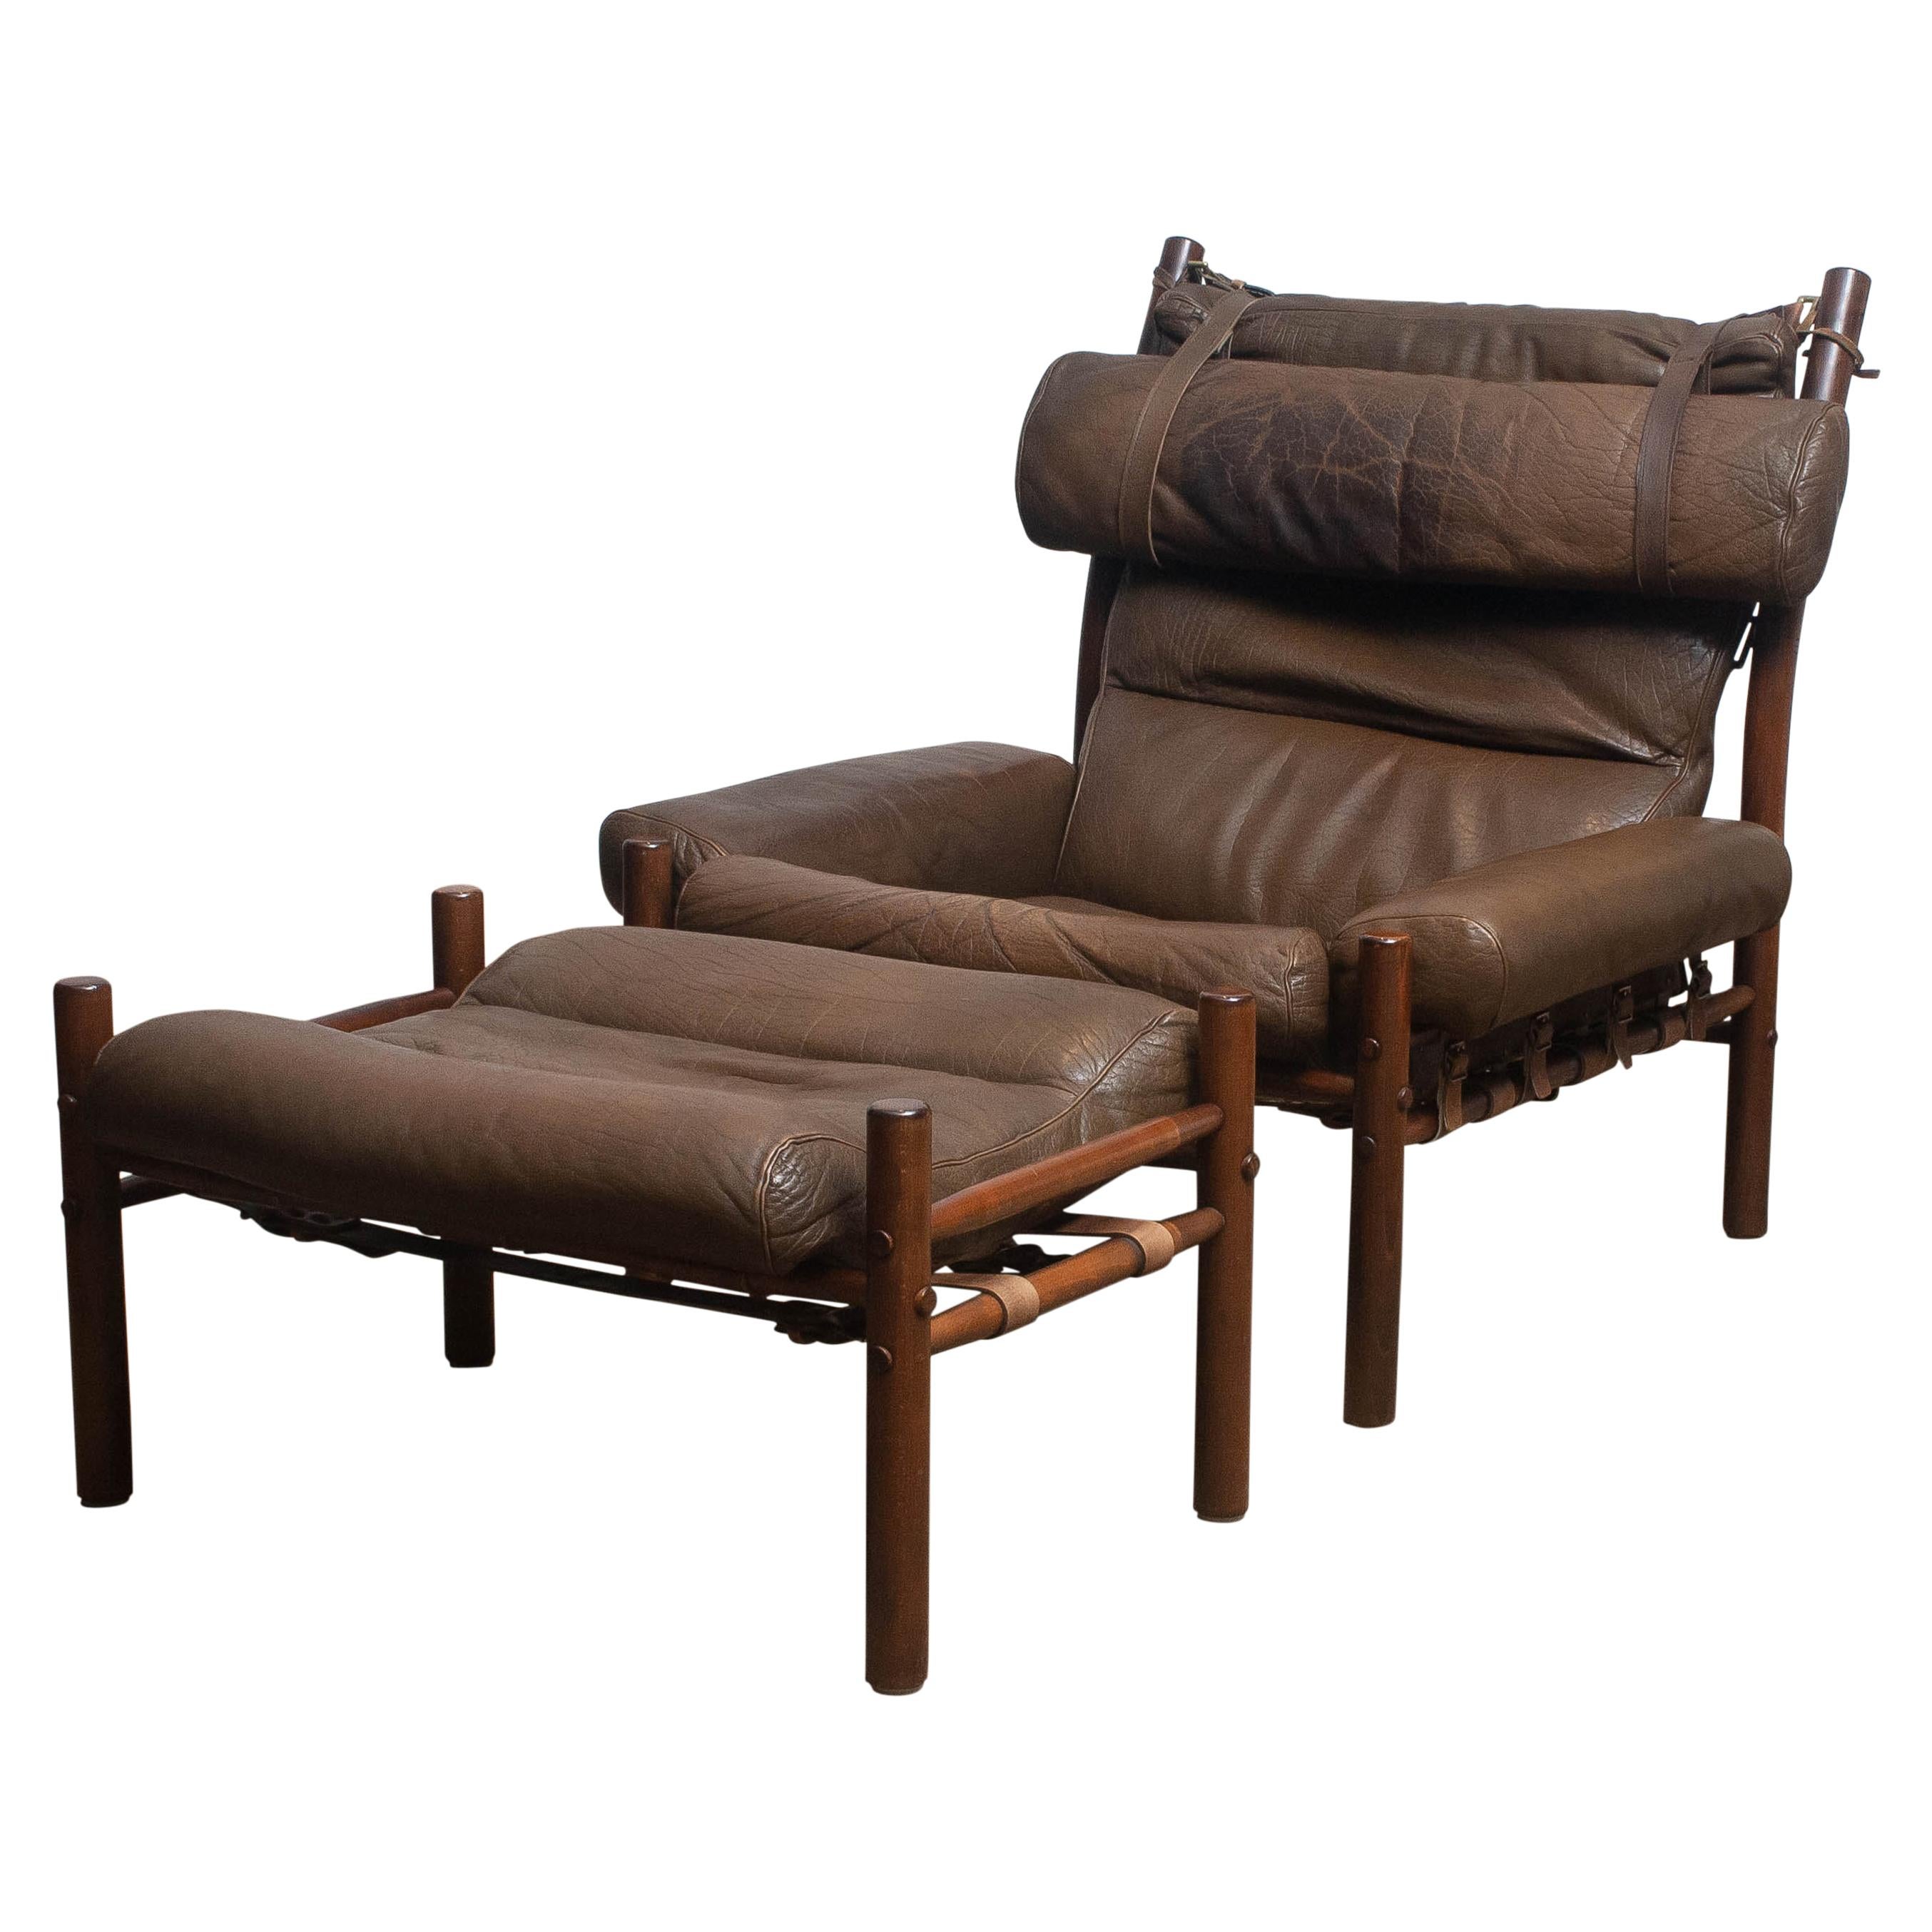 1970s, Brown Leather Chair "Inca" and Ottoman by Arne Norell Möbler AB, Sweden